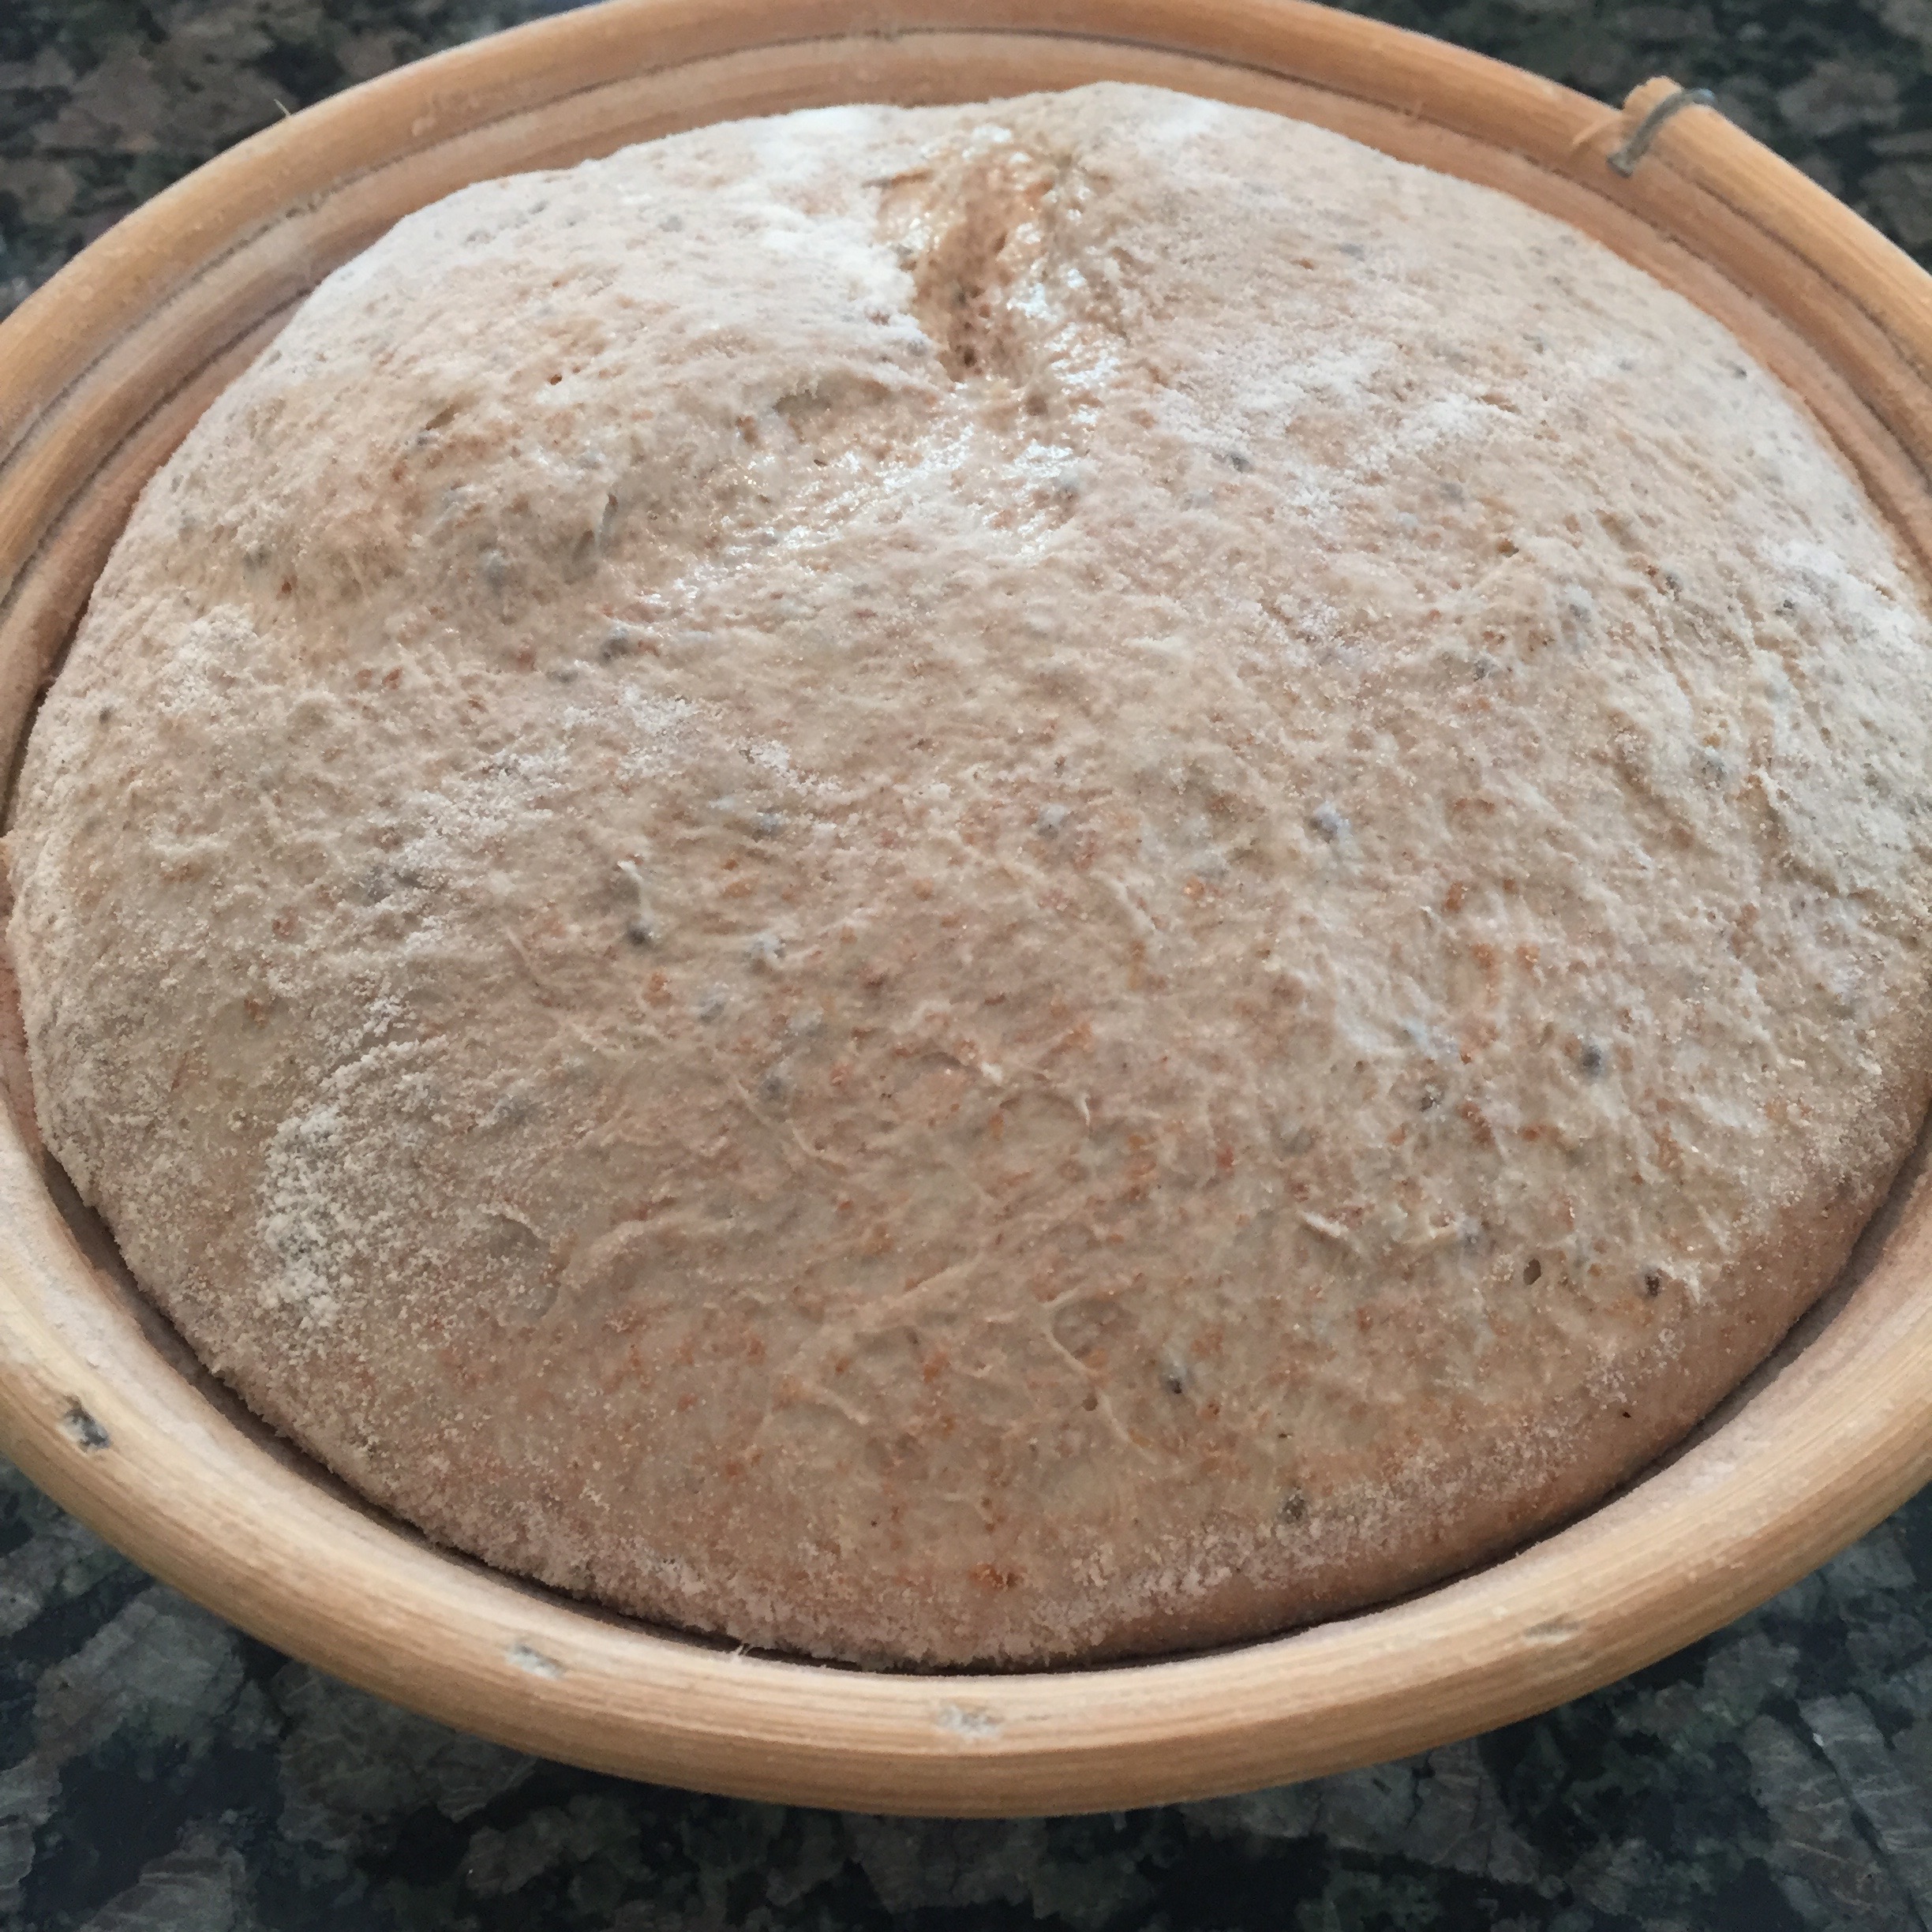 risen dough inside the banneton, and ready for baking.